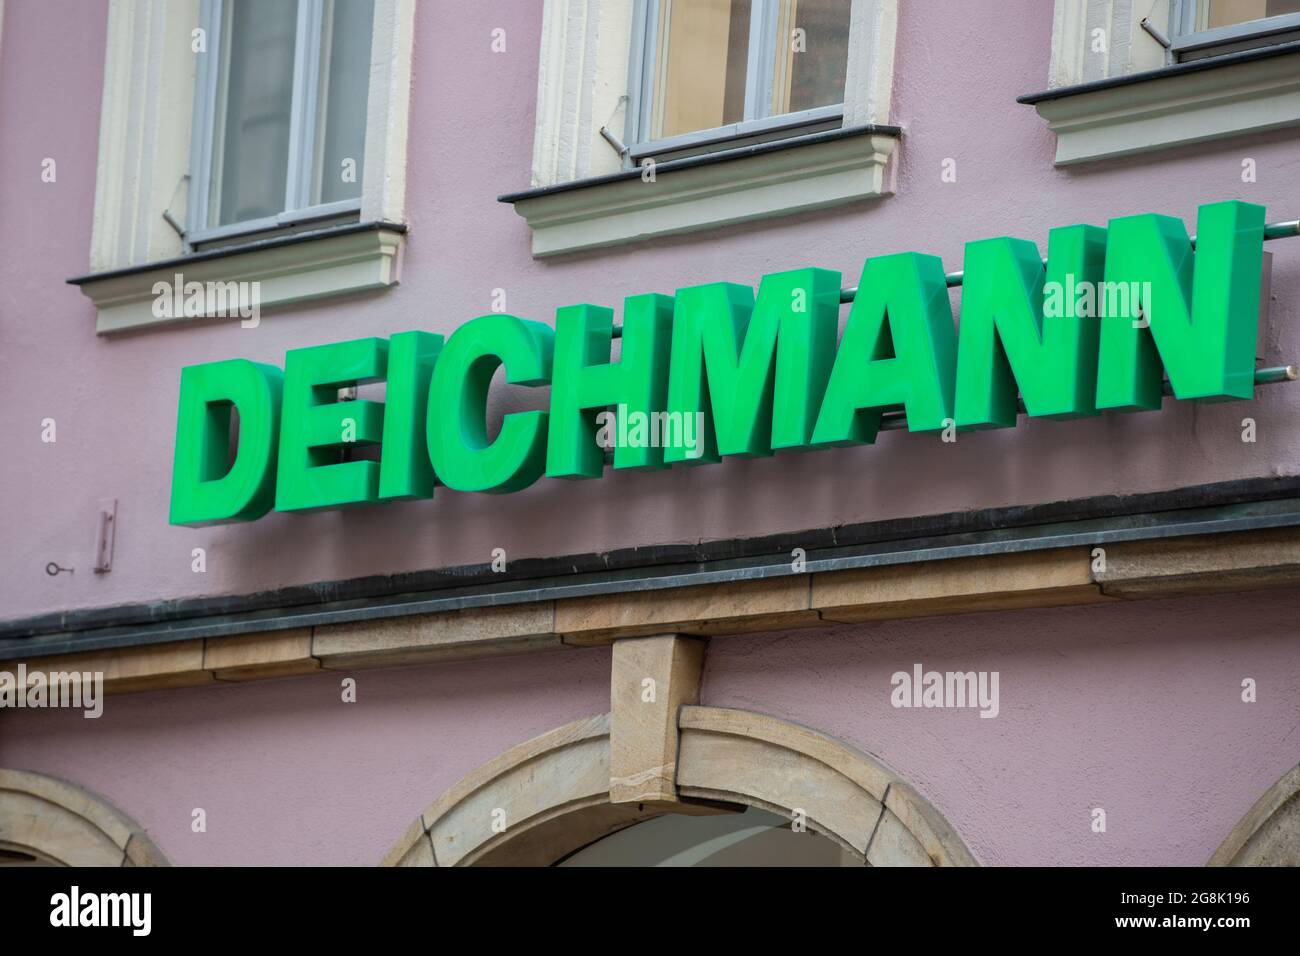 Deichmann Logo High Resolution Stock Photography and Images - Alamy